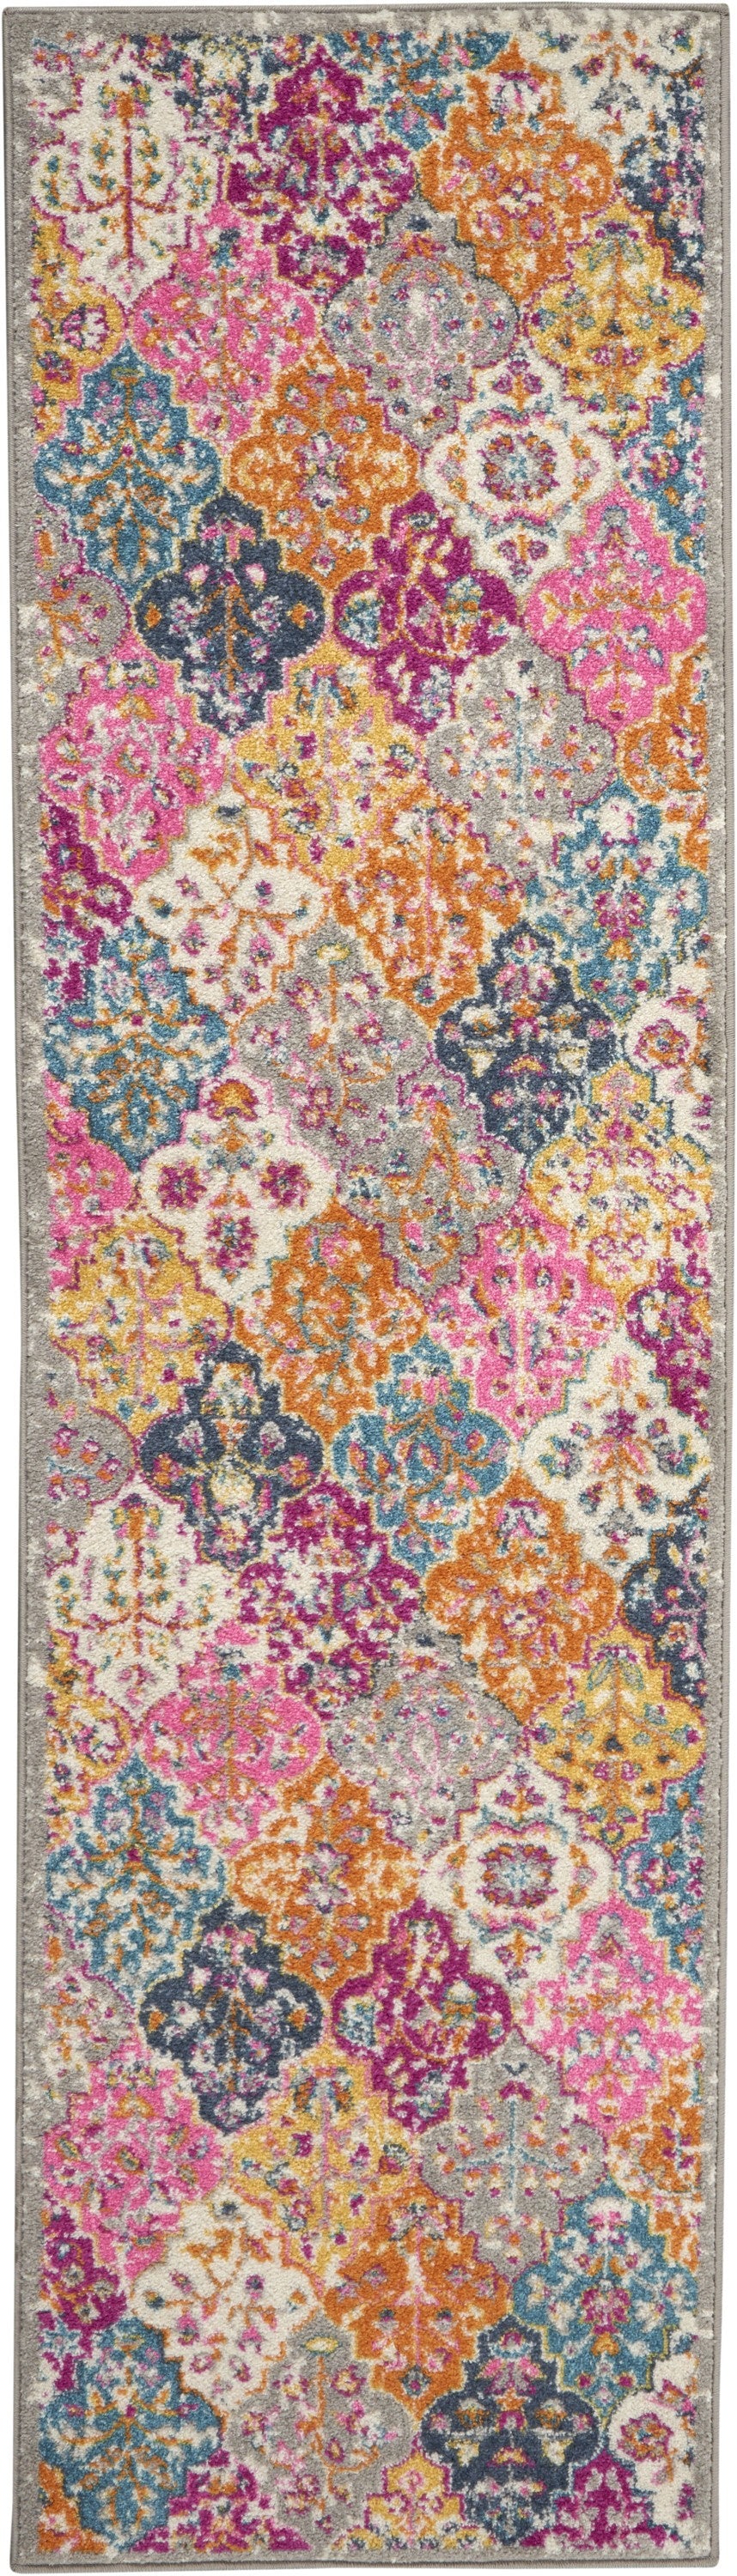 2’ x 8’ Muted Brights Floral Diamond Runner Rug